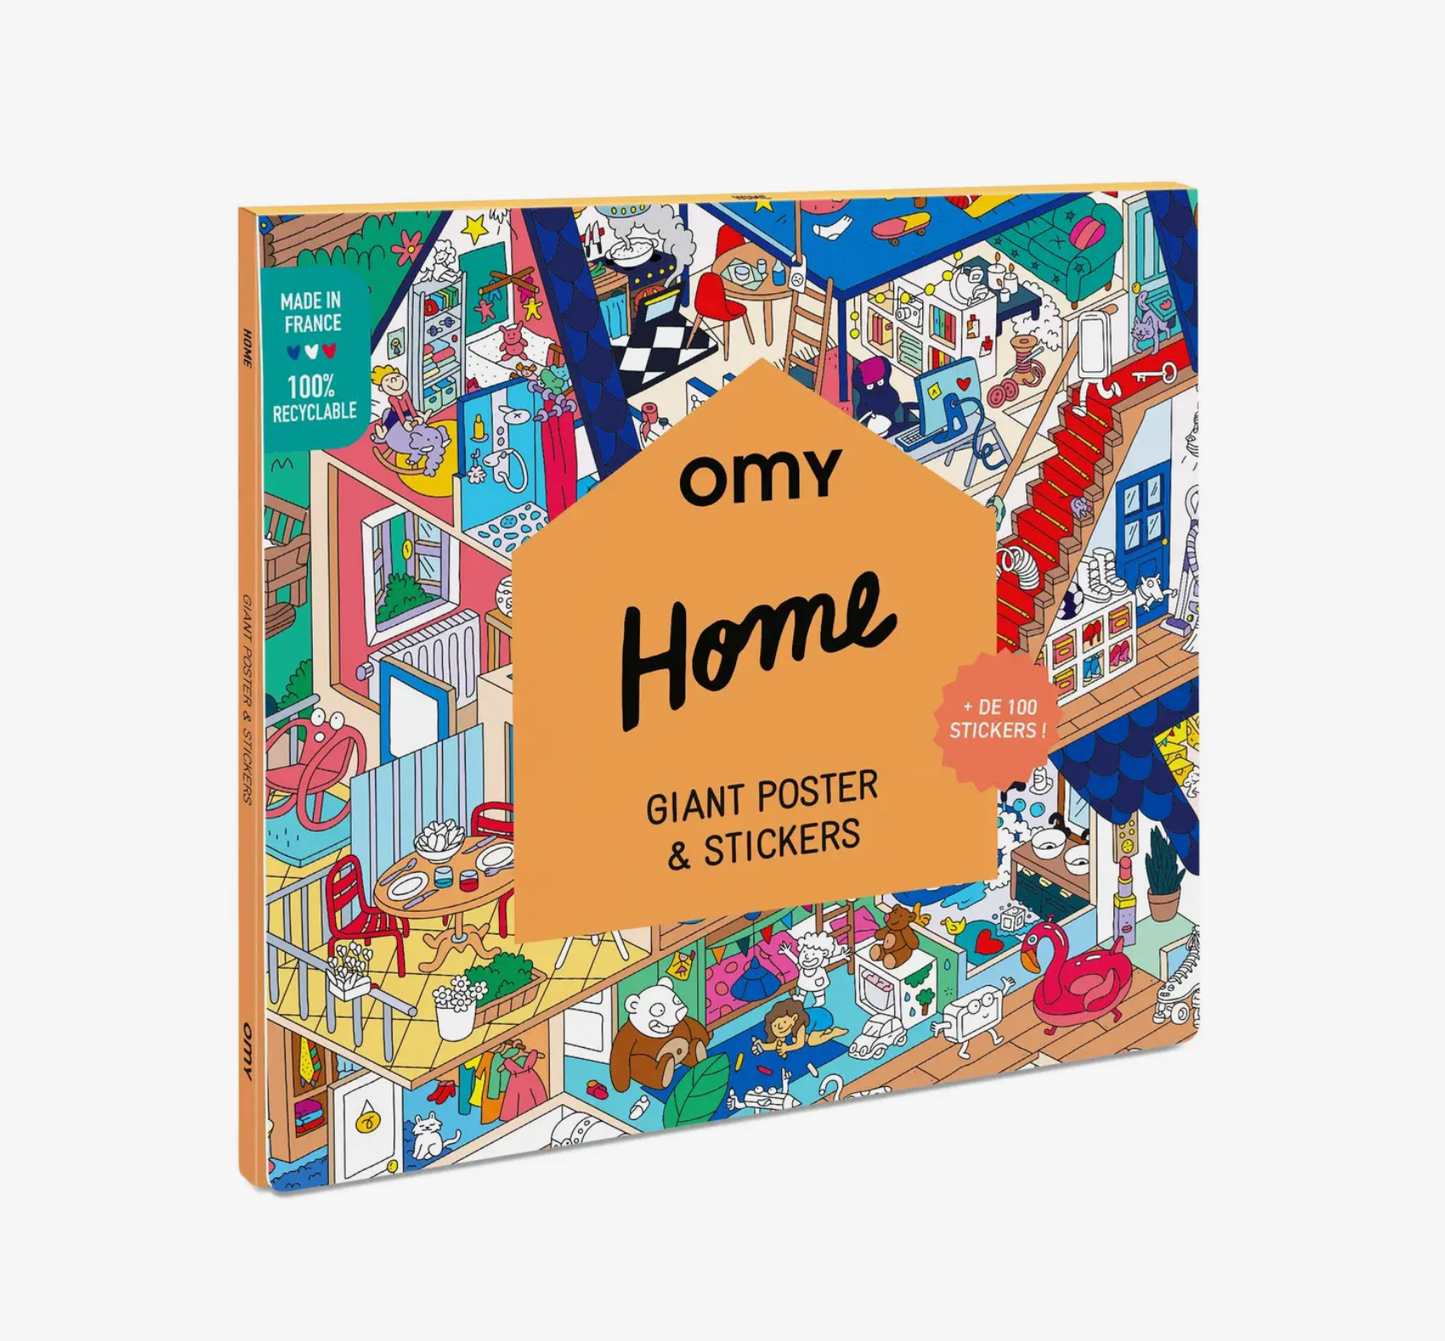 Home Giant Sticker Poster